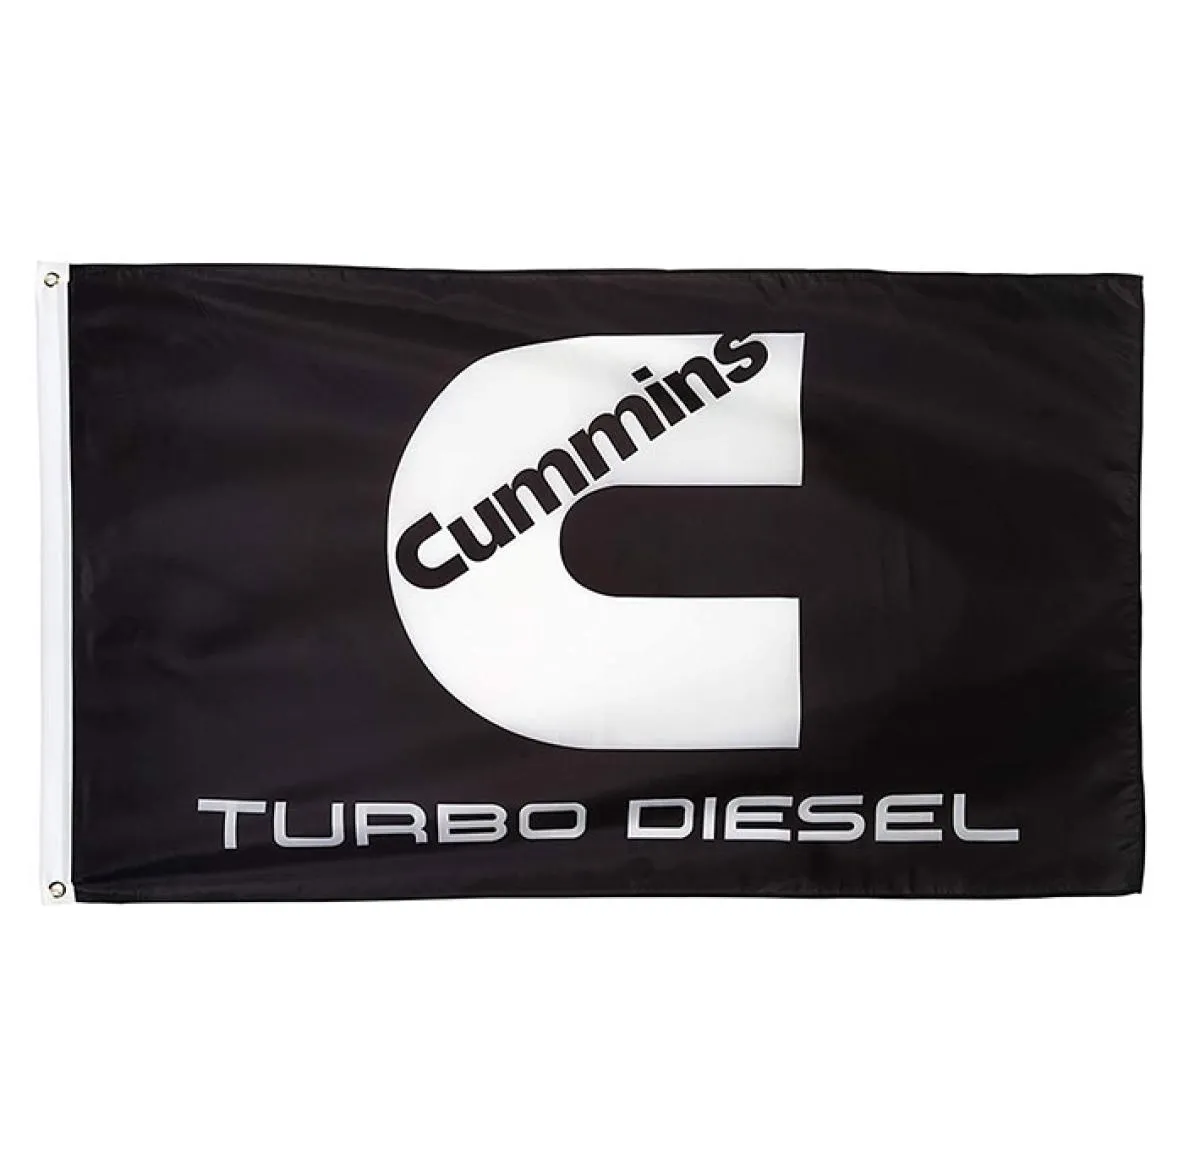 Cummins Banner Turbo Diesel Flag 3x5ft Polyester Outdoor or Indoor Club Digital printing Banner and Flags Whole2260709